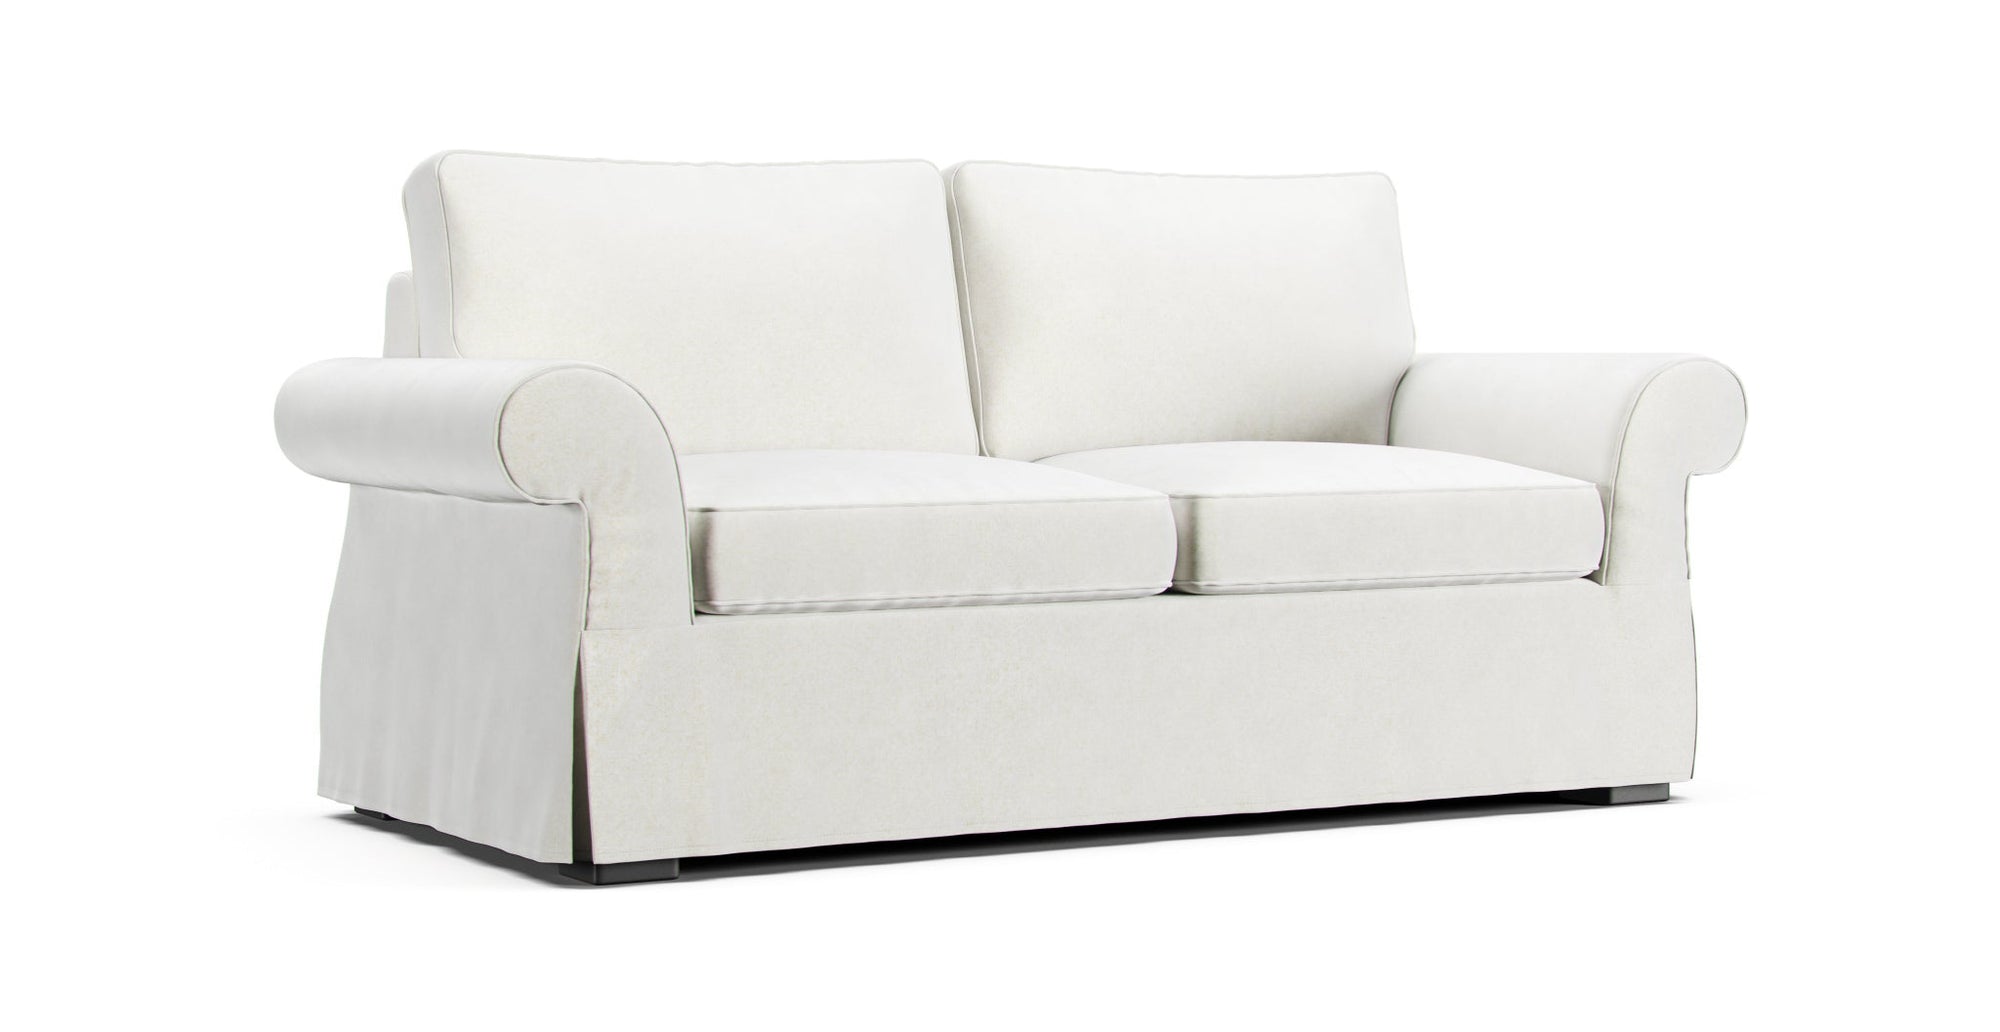 Pottery Barn Pearce Roll Arm eighty-one inches sofa featuring Claw-proof Velvet Cream slipcover